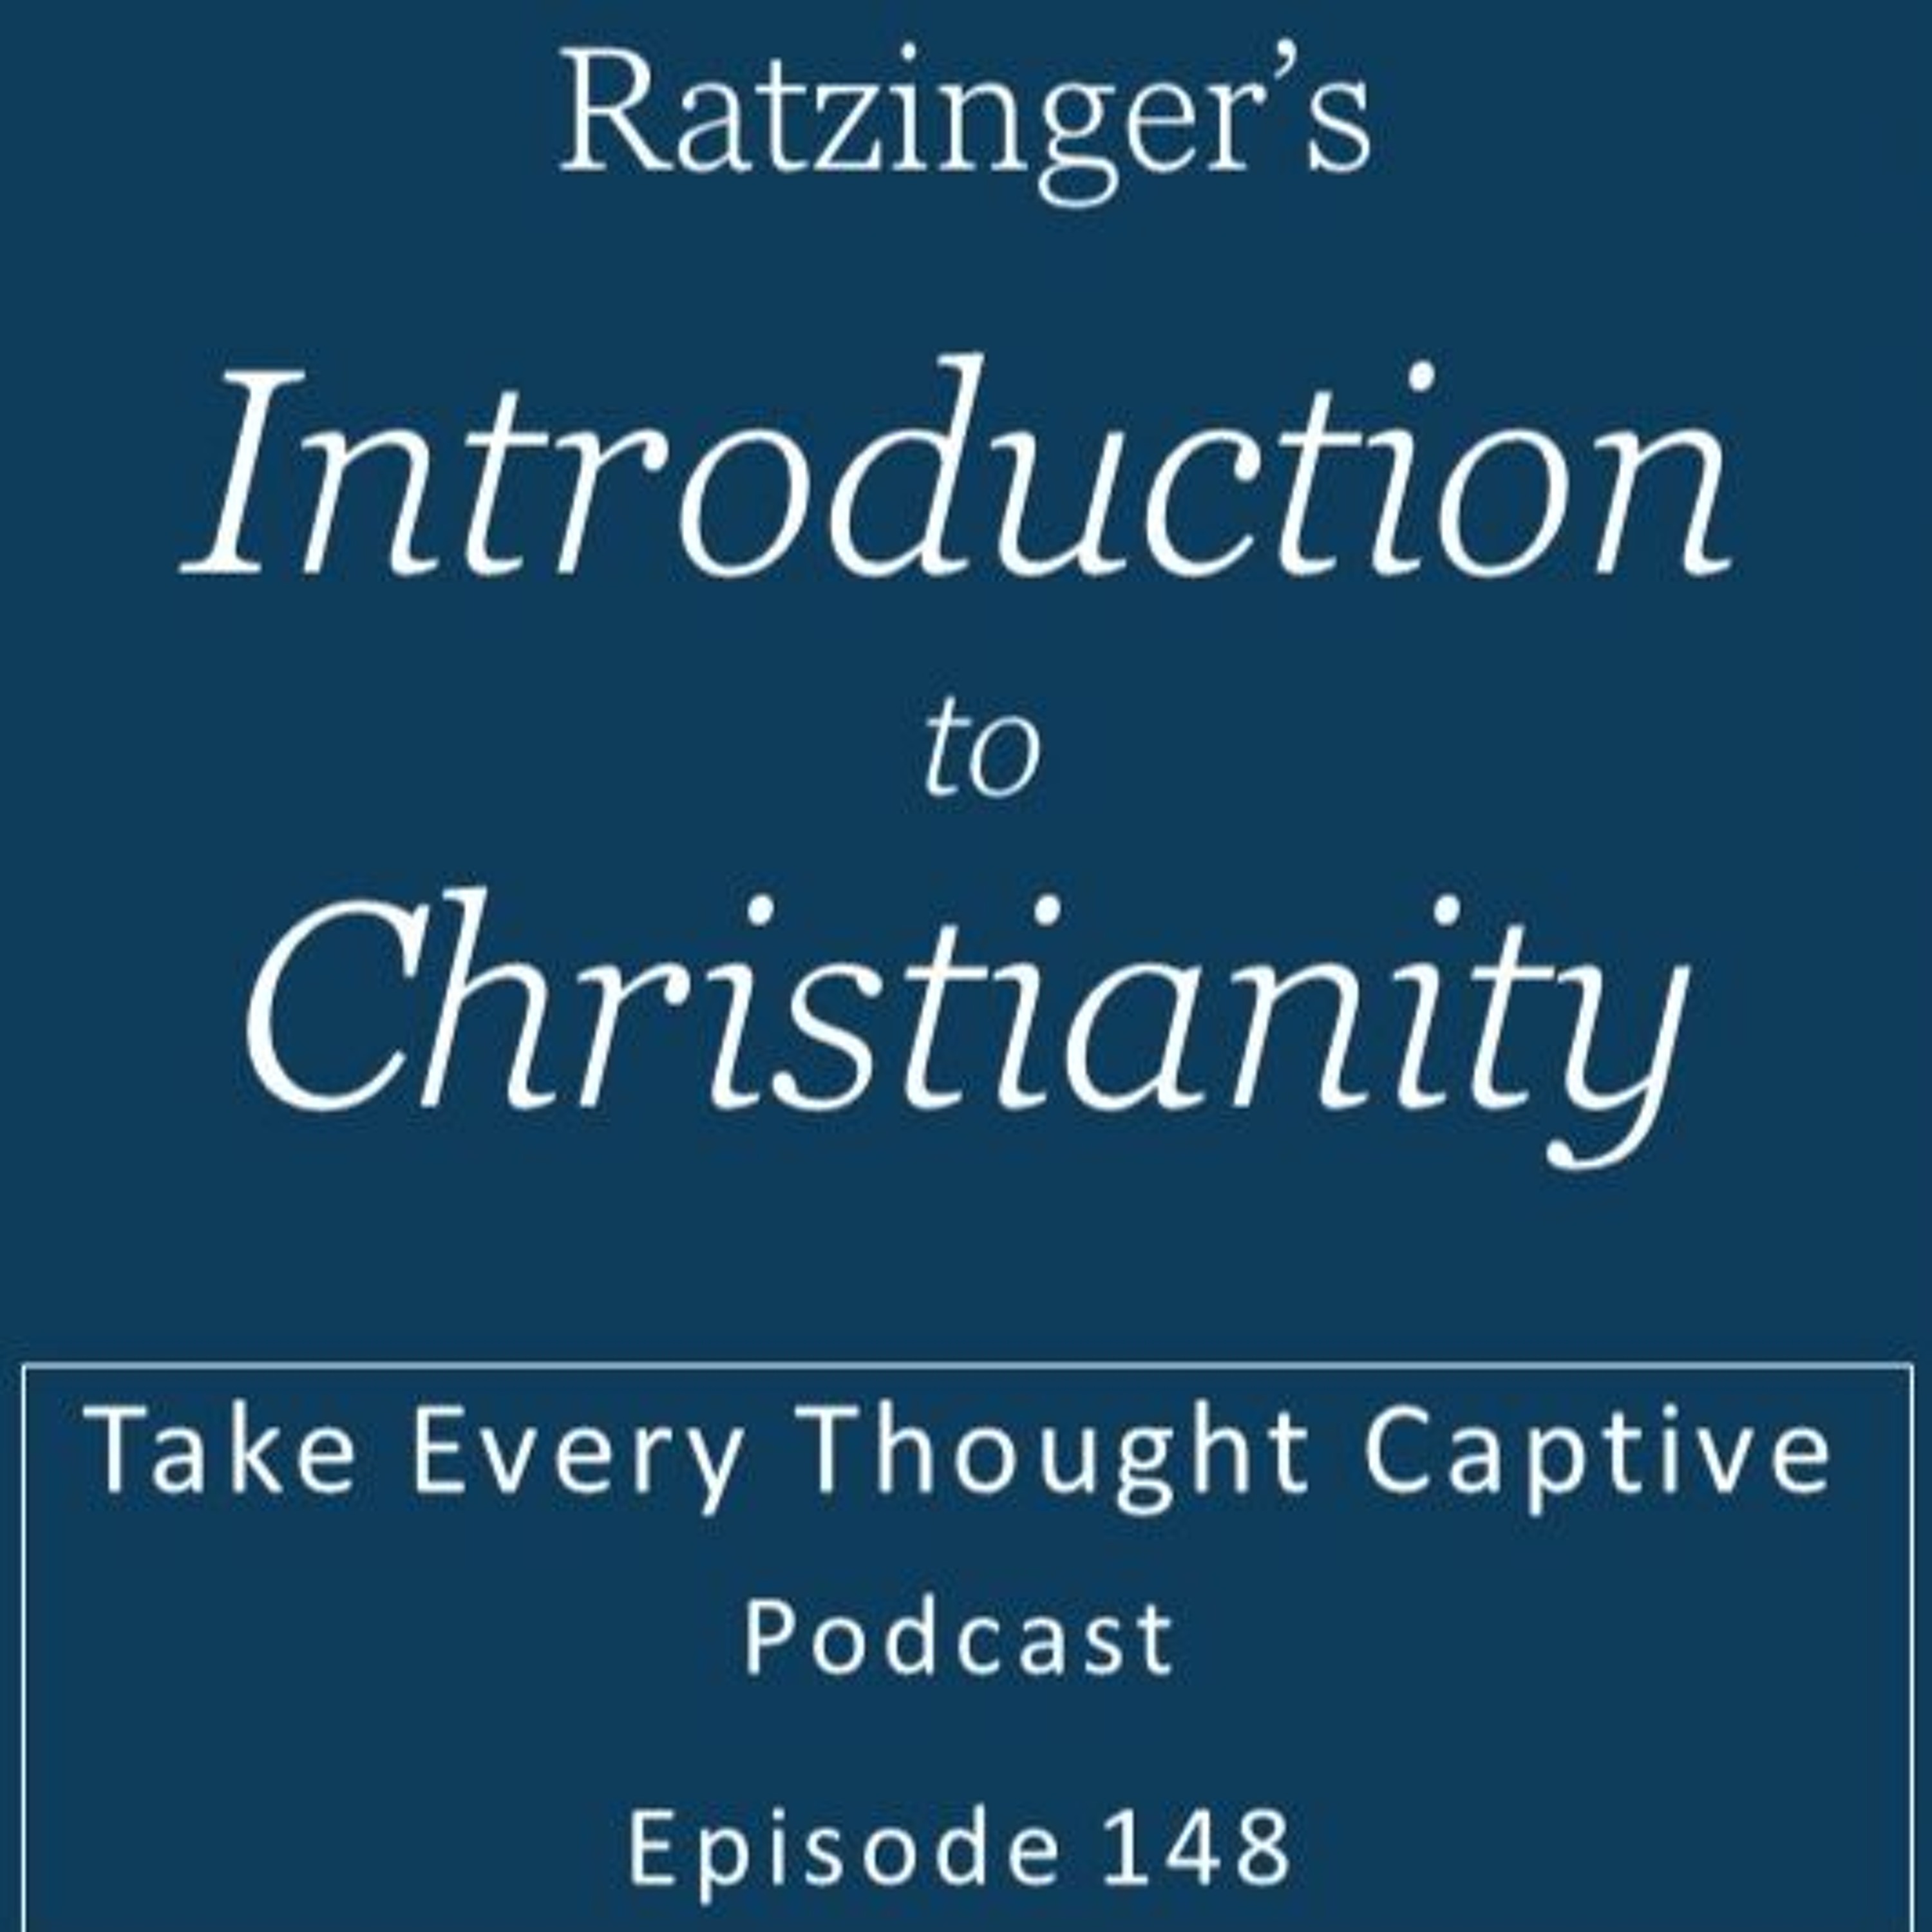 Ratzinger’s Introduction to Christianity